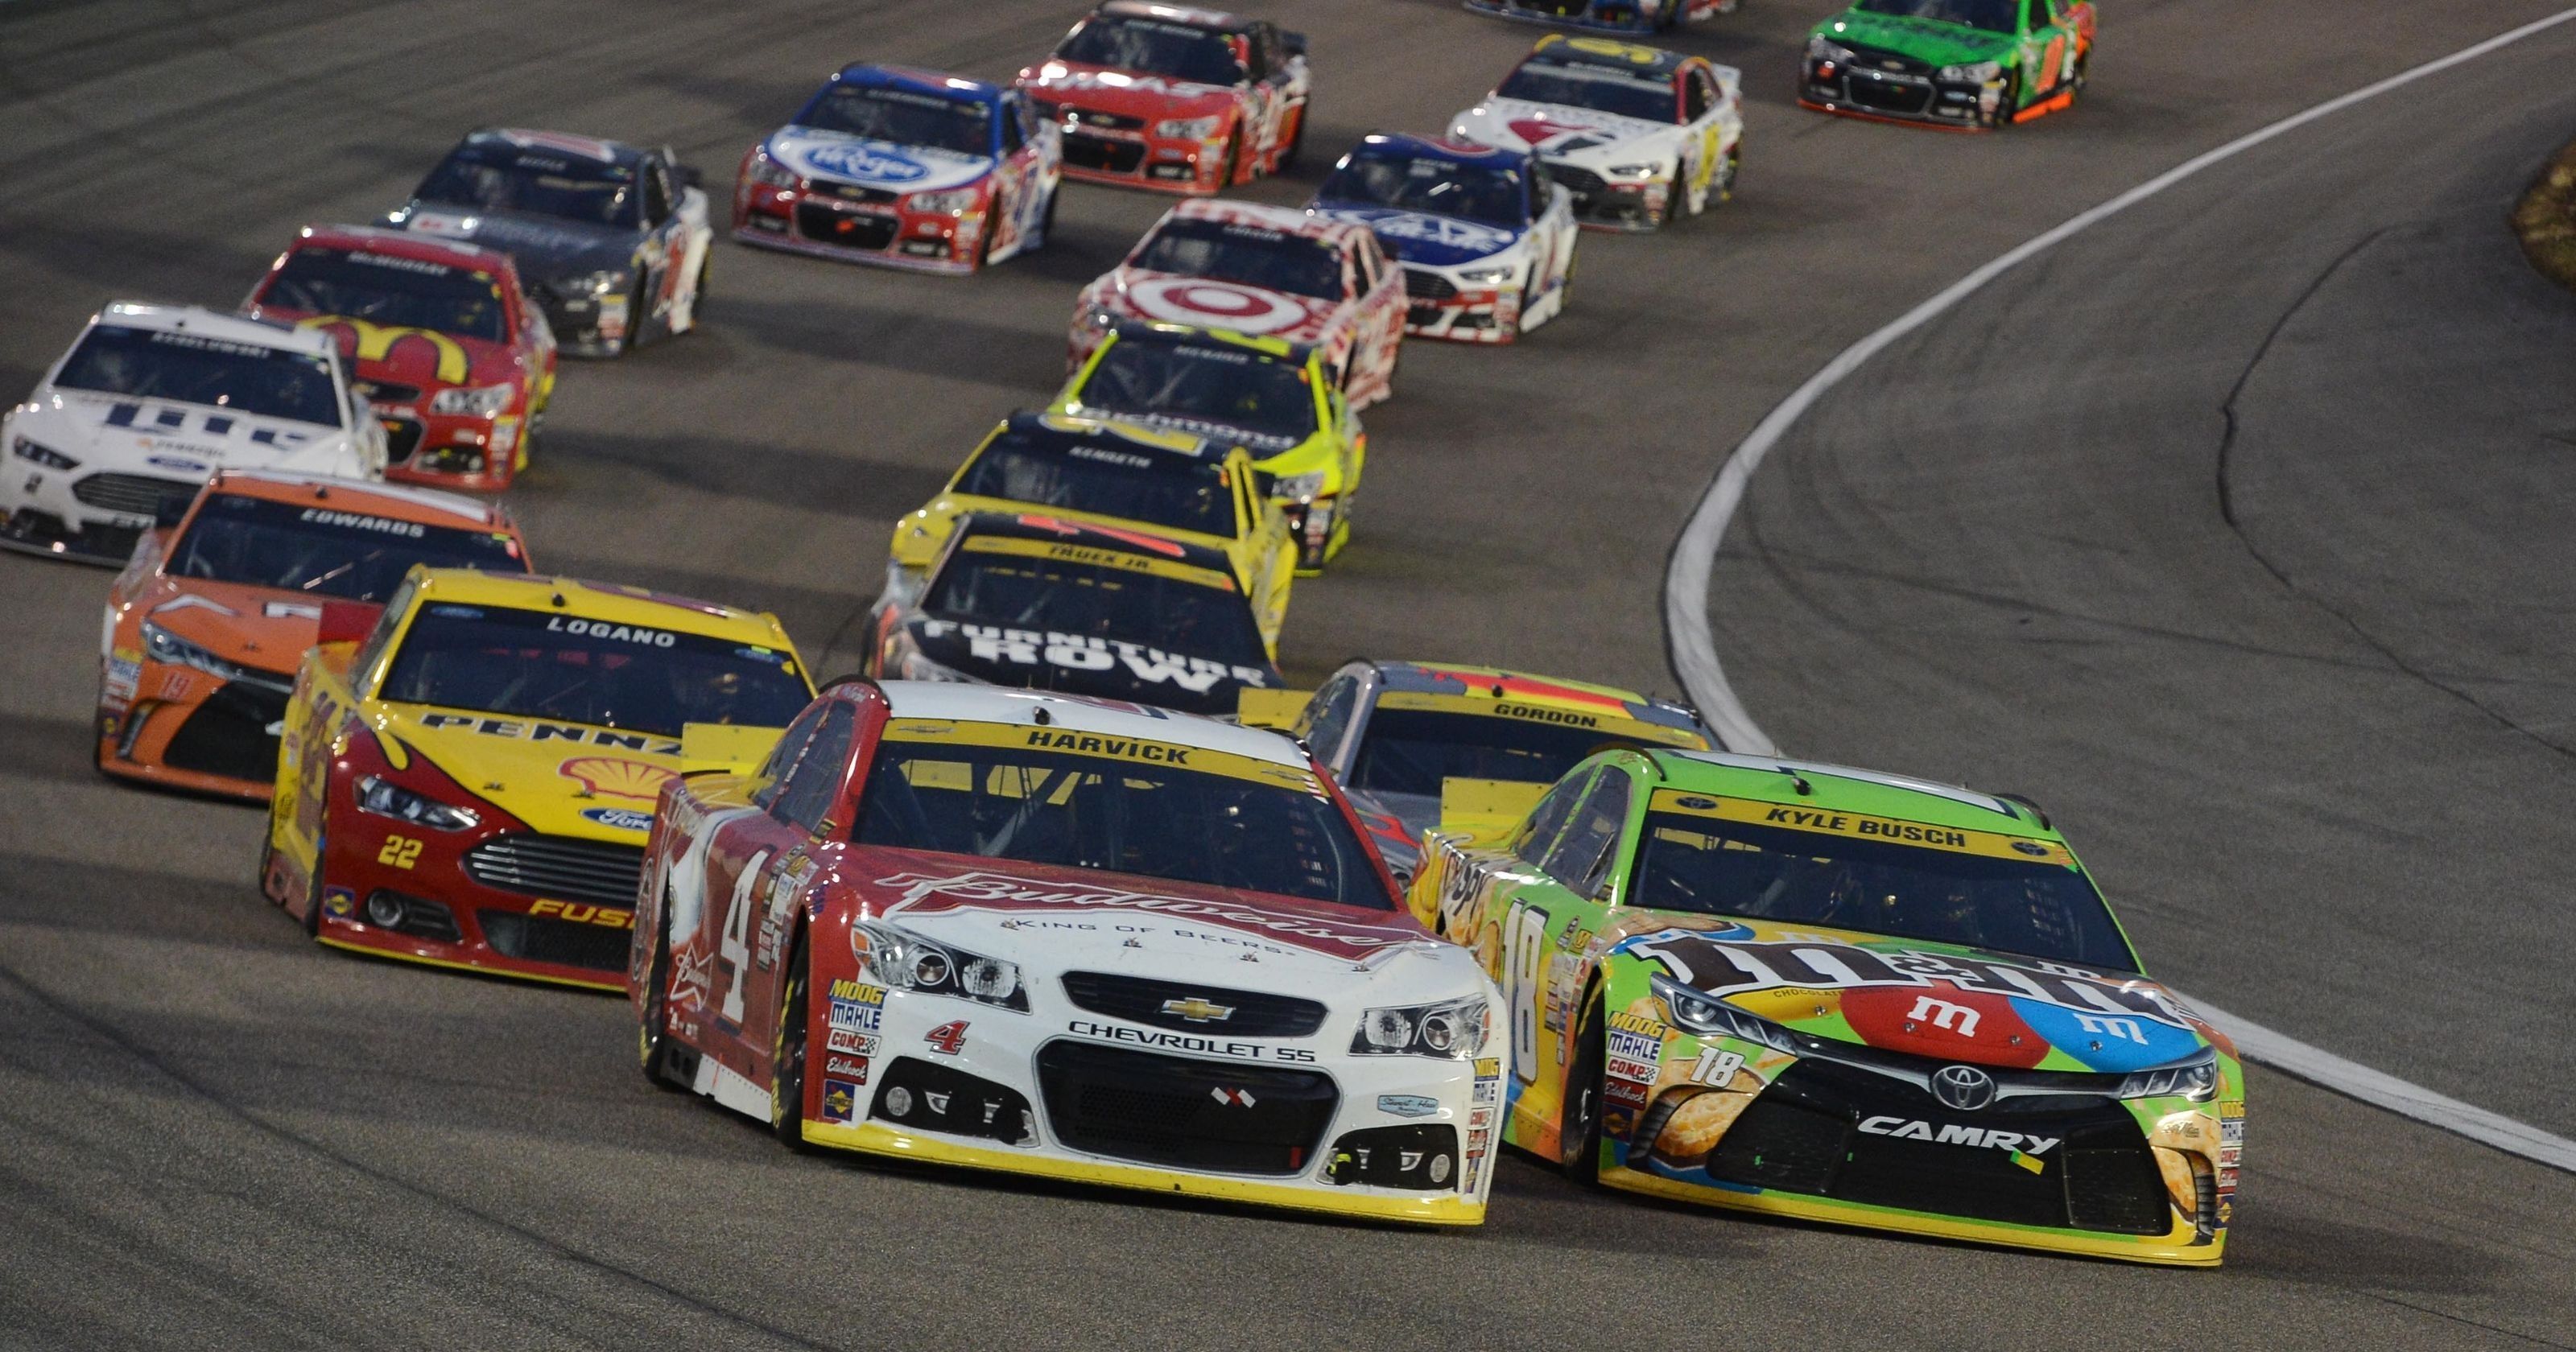 Free download Fresh Nascar Wallpapers Hd di 2020 [3200x1680] for your